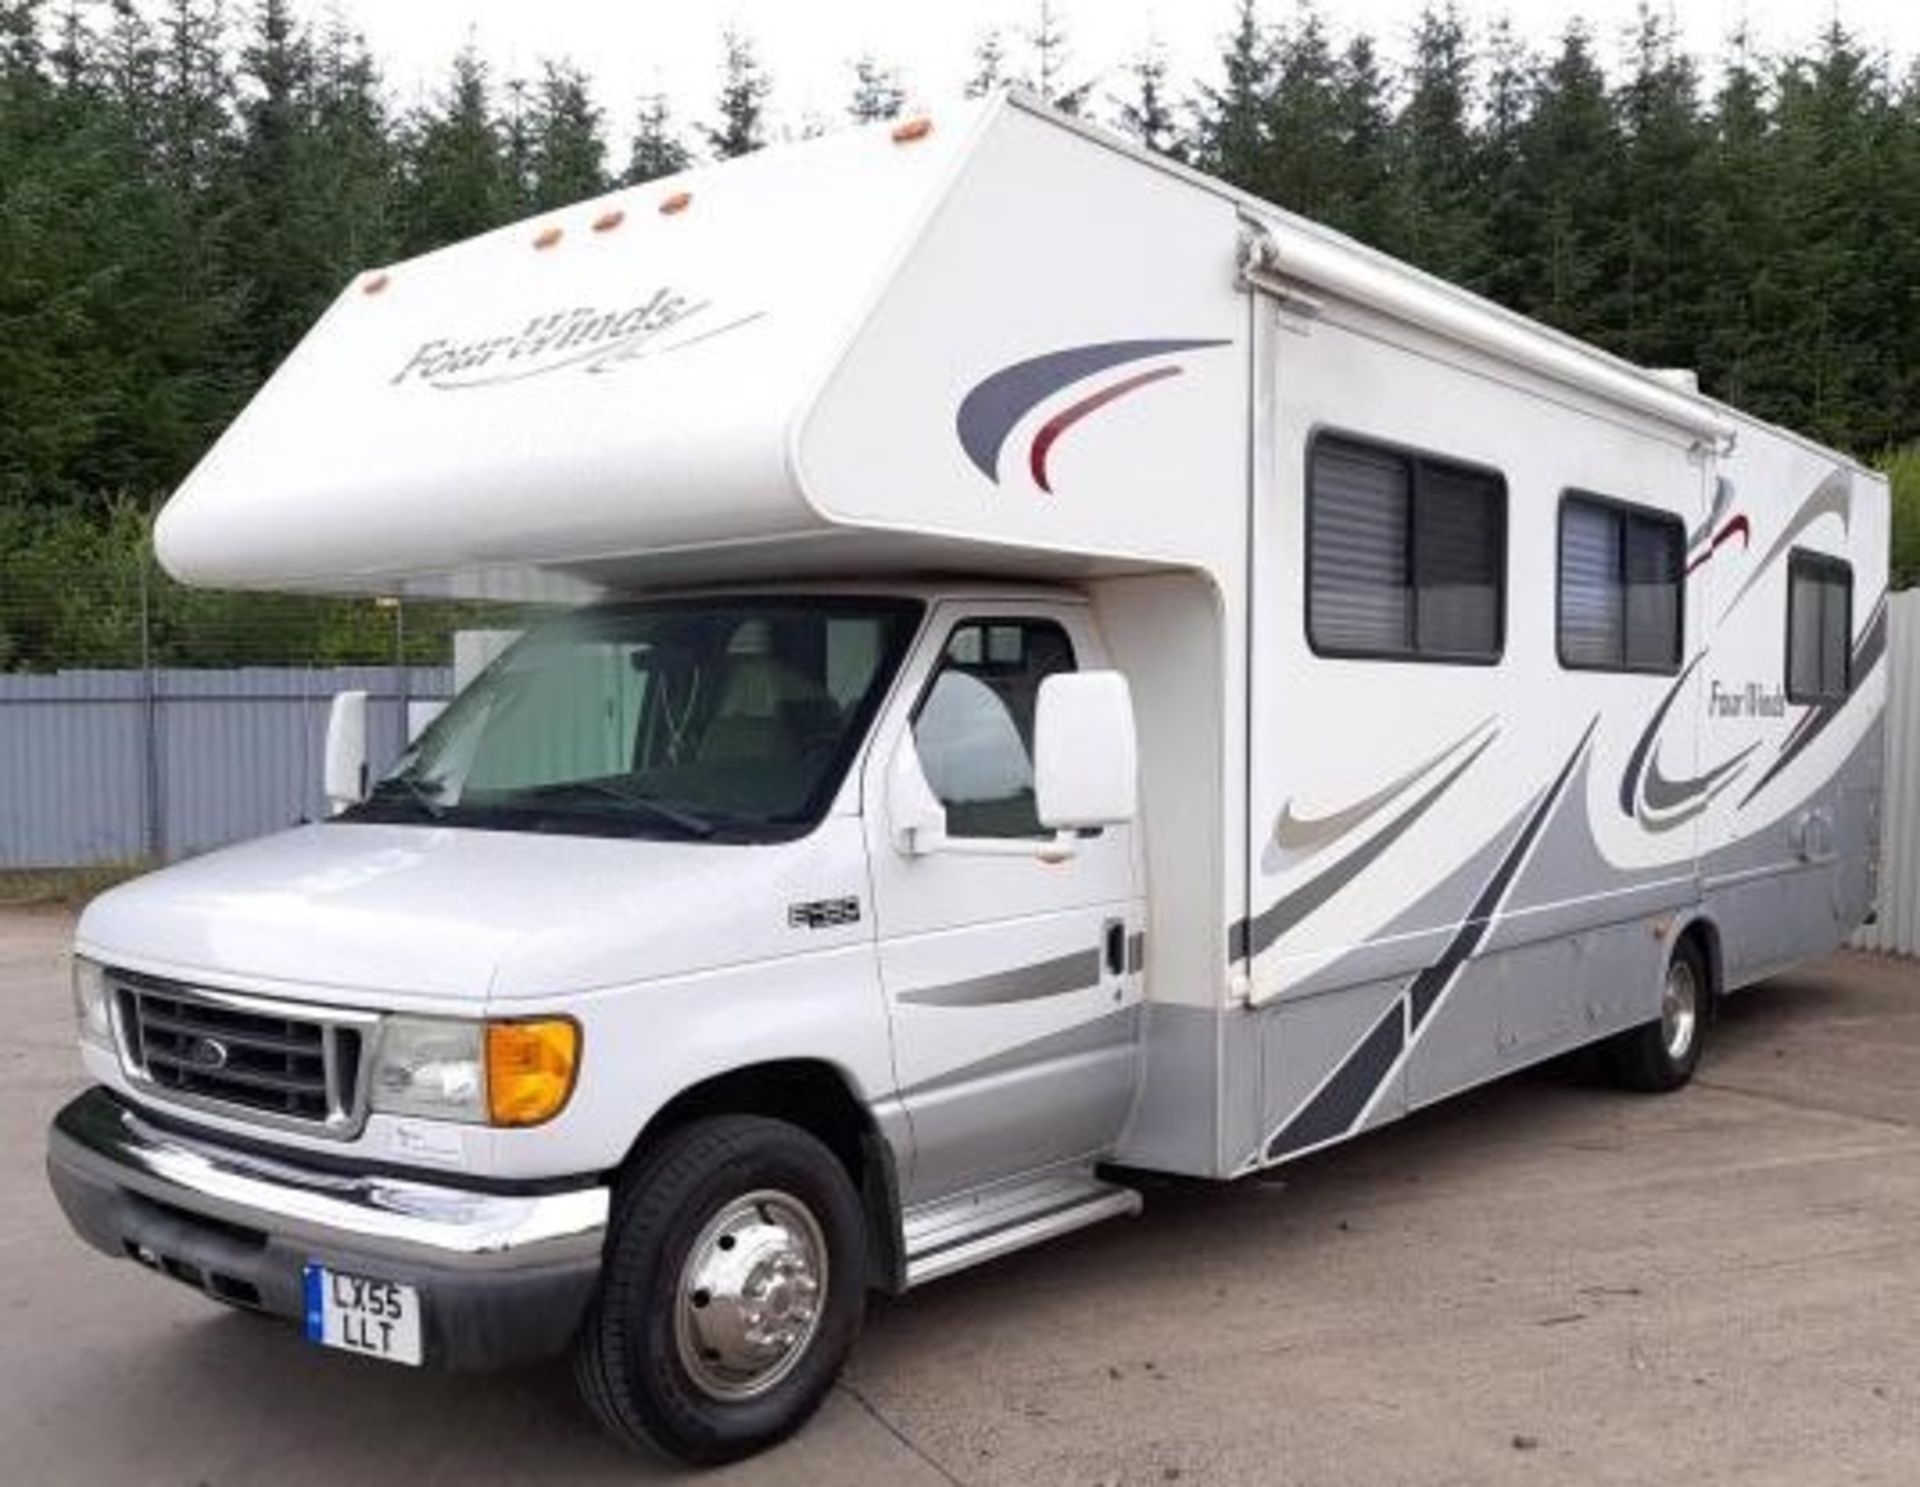 FORD E450 FOURWINDS RV 7 BERTH LHD MOTORHOME, VERY LOW MILEAGE 34,453 MILES *NO VAT* - Image 2 of 13